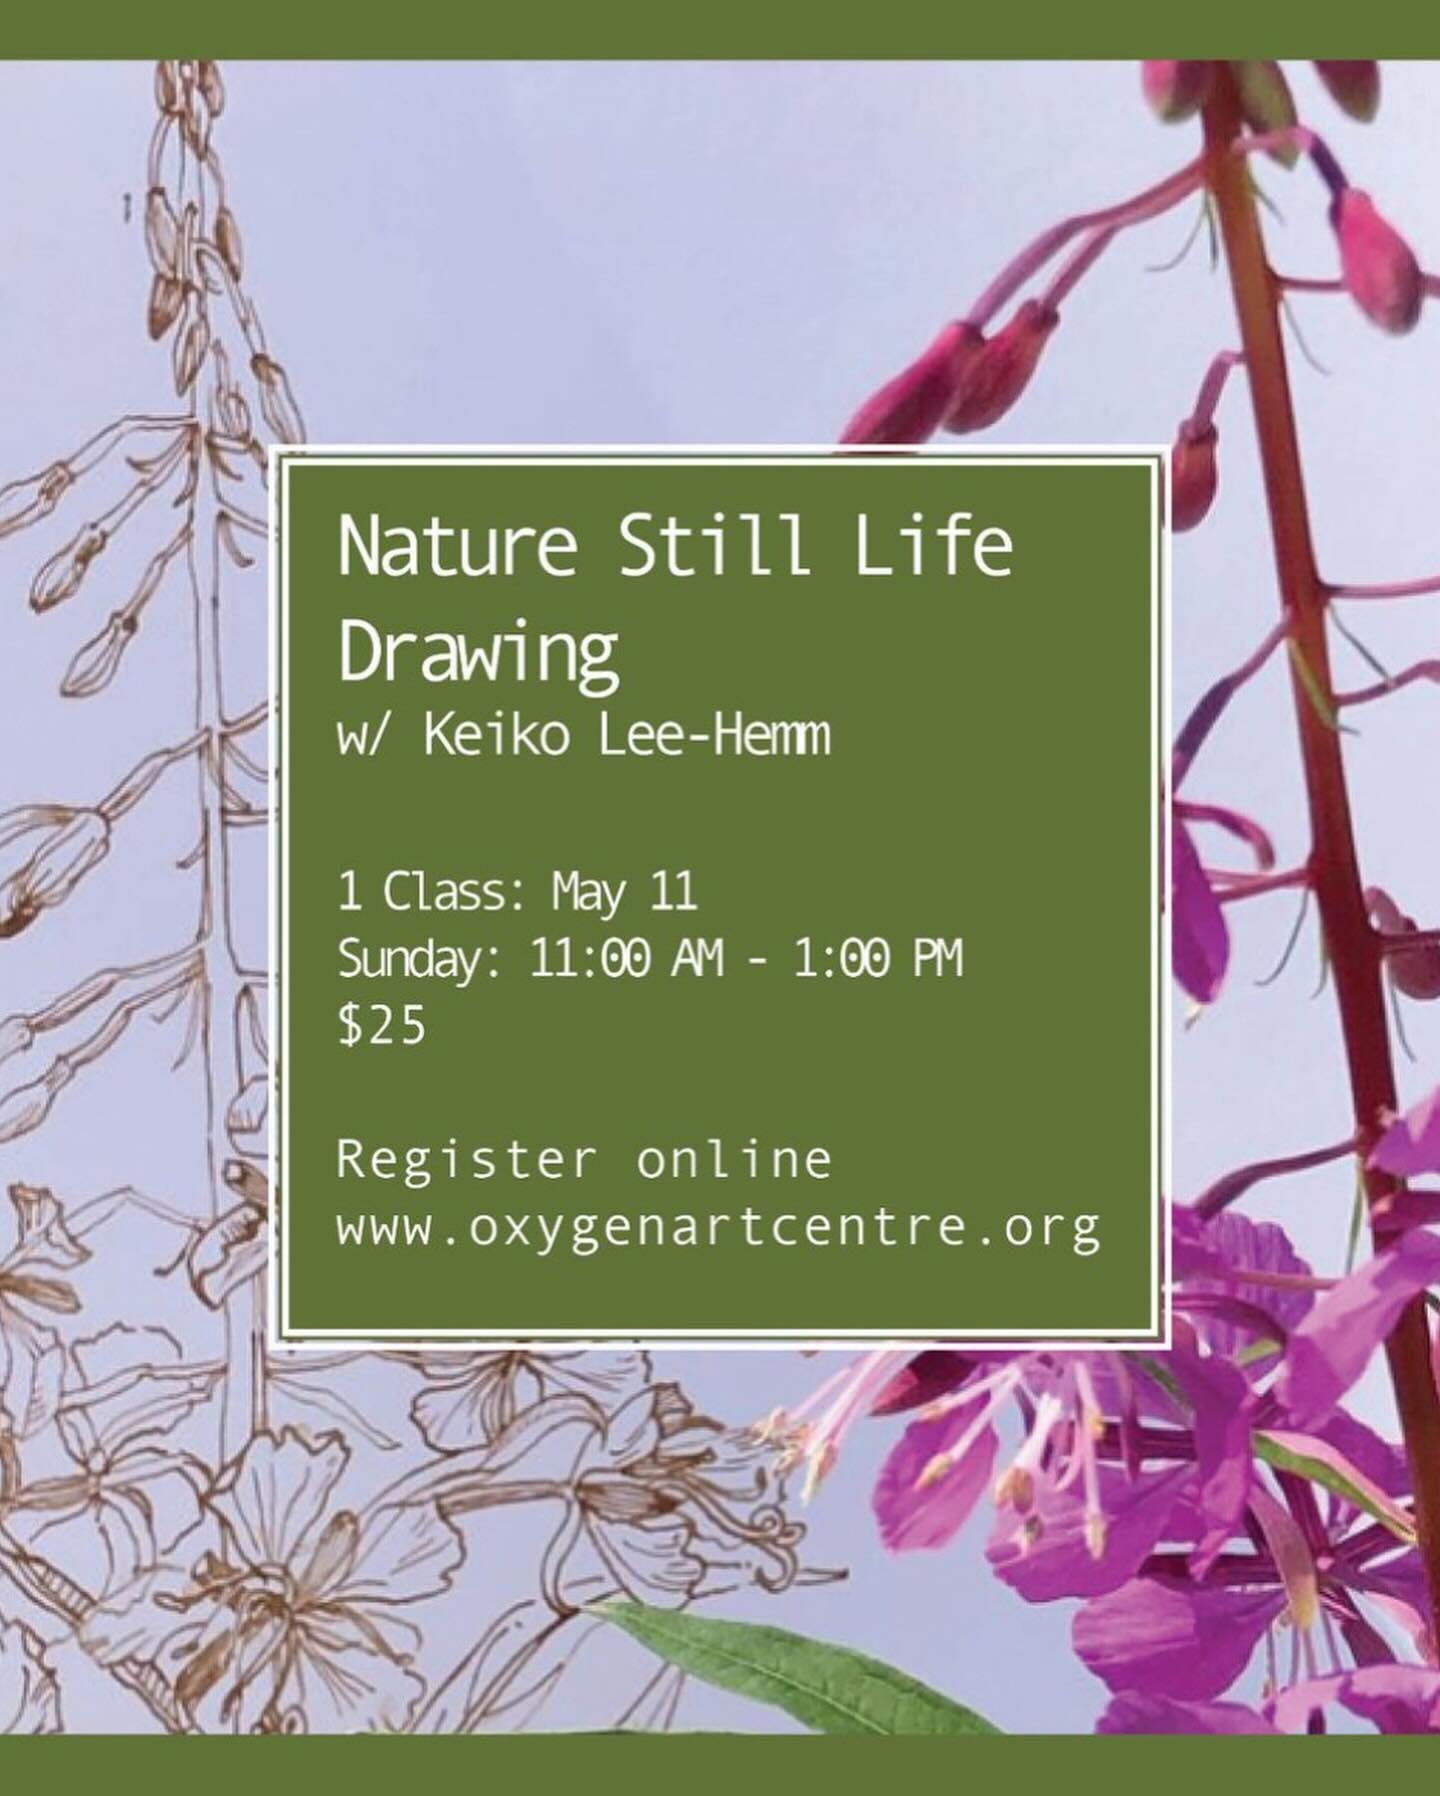 🌷The land is waking up and the colours are coming back. Let&rsquo;s savour nature&rsquo;s beauty together. I&rsquo;ll be leading a Nature Still Life drawing session at @oxygen.art.centre on May 11, 11-1. Space is limited, but classes only run when f